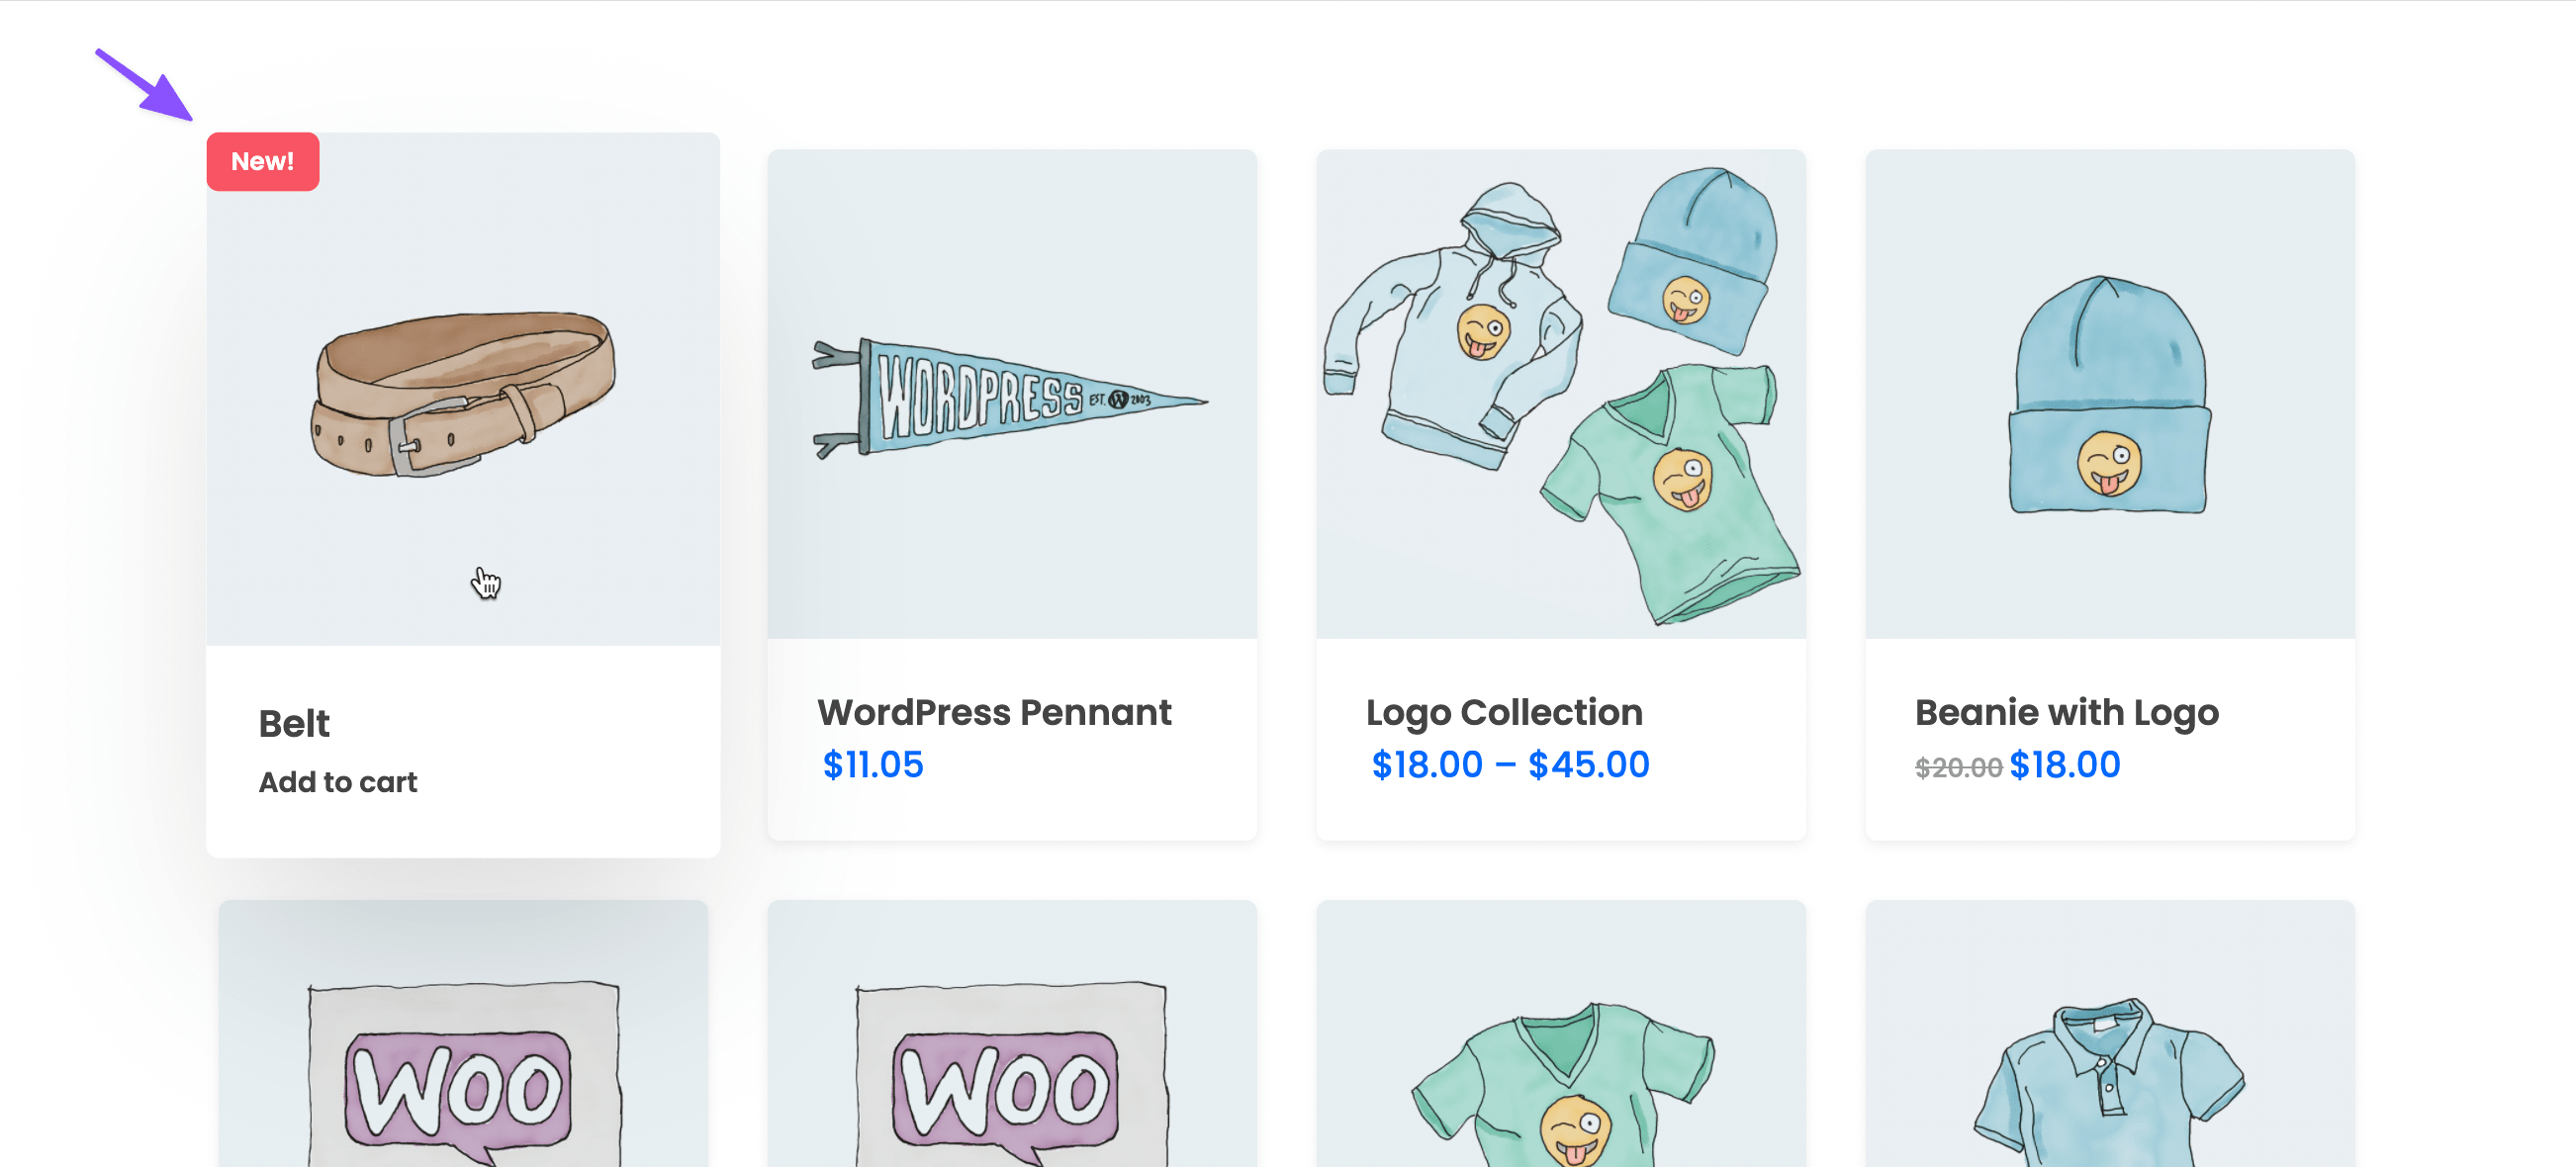 Custom WP Grid Builder Block for Showing NEW Badge on WooCommerce Products